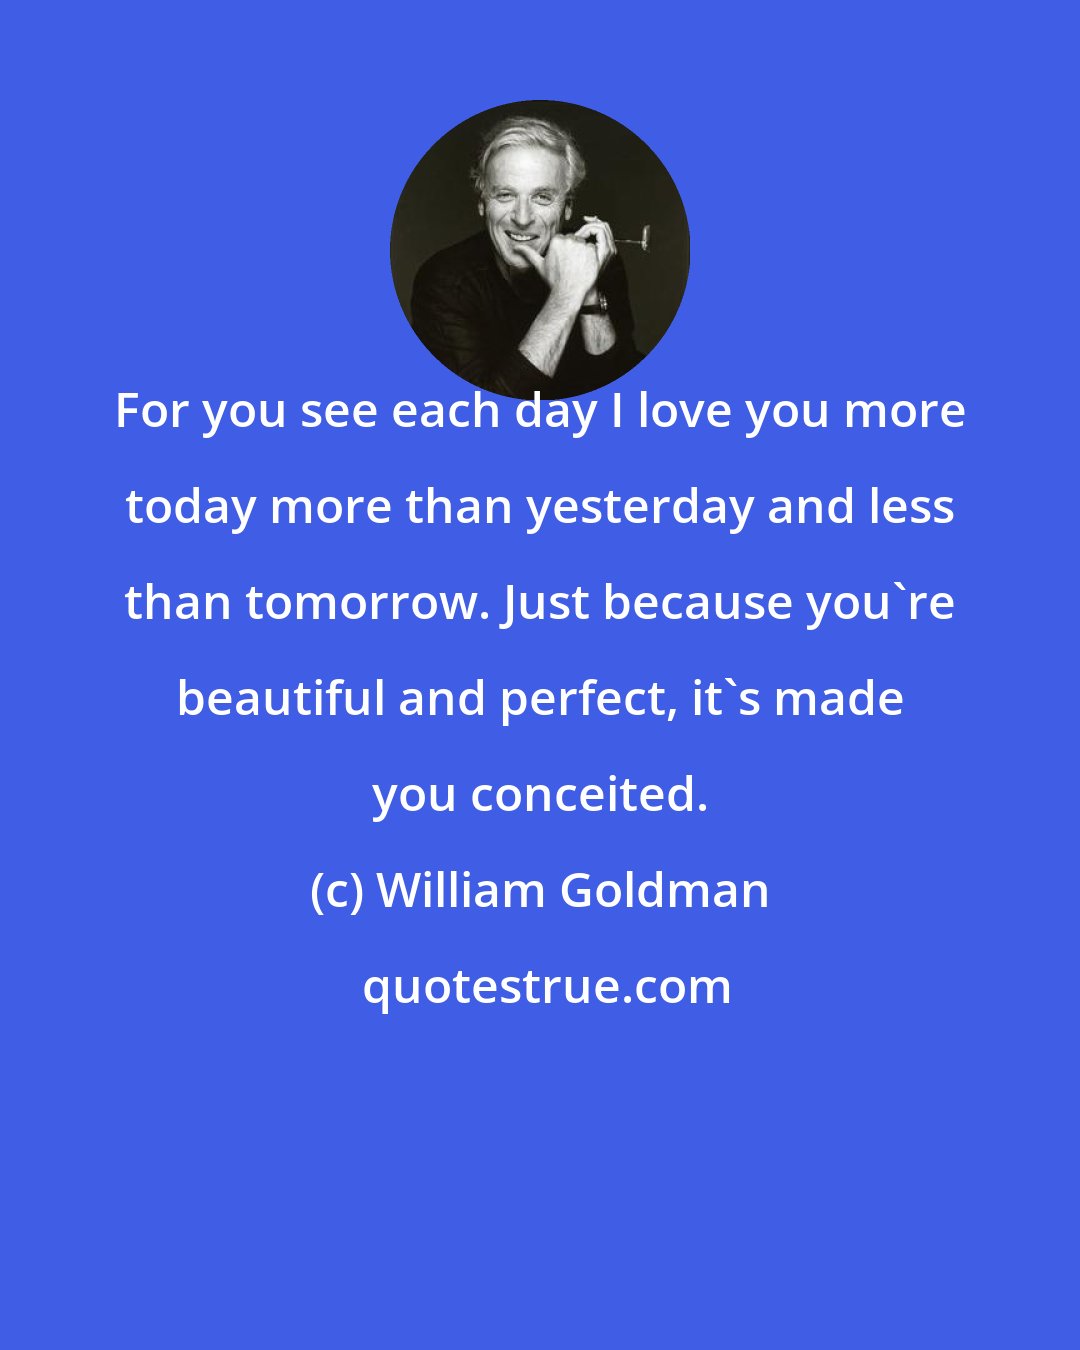 William Goldman: For you see each day I love you more today more than yesterday and less than tomorrow. Just because you're beautiful and perfect, it's made you conceited.